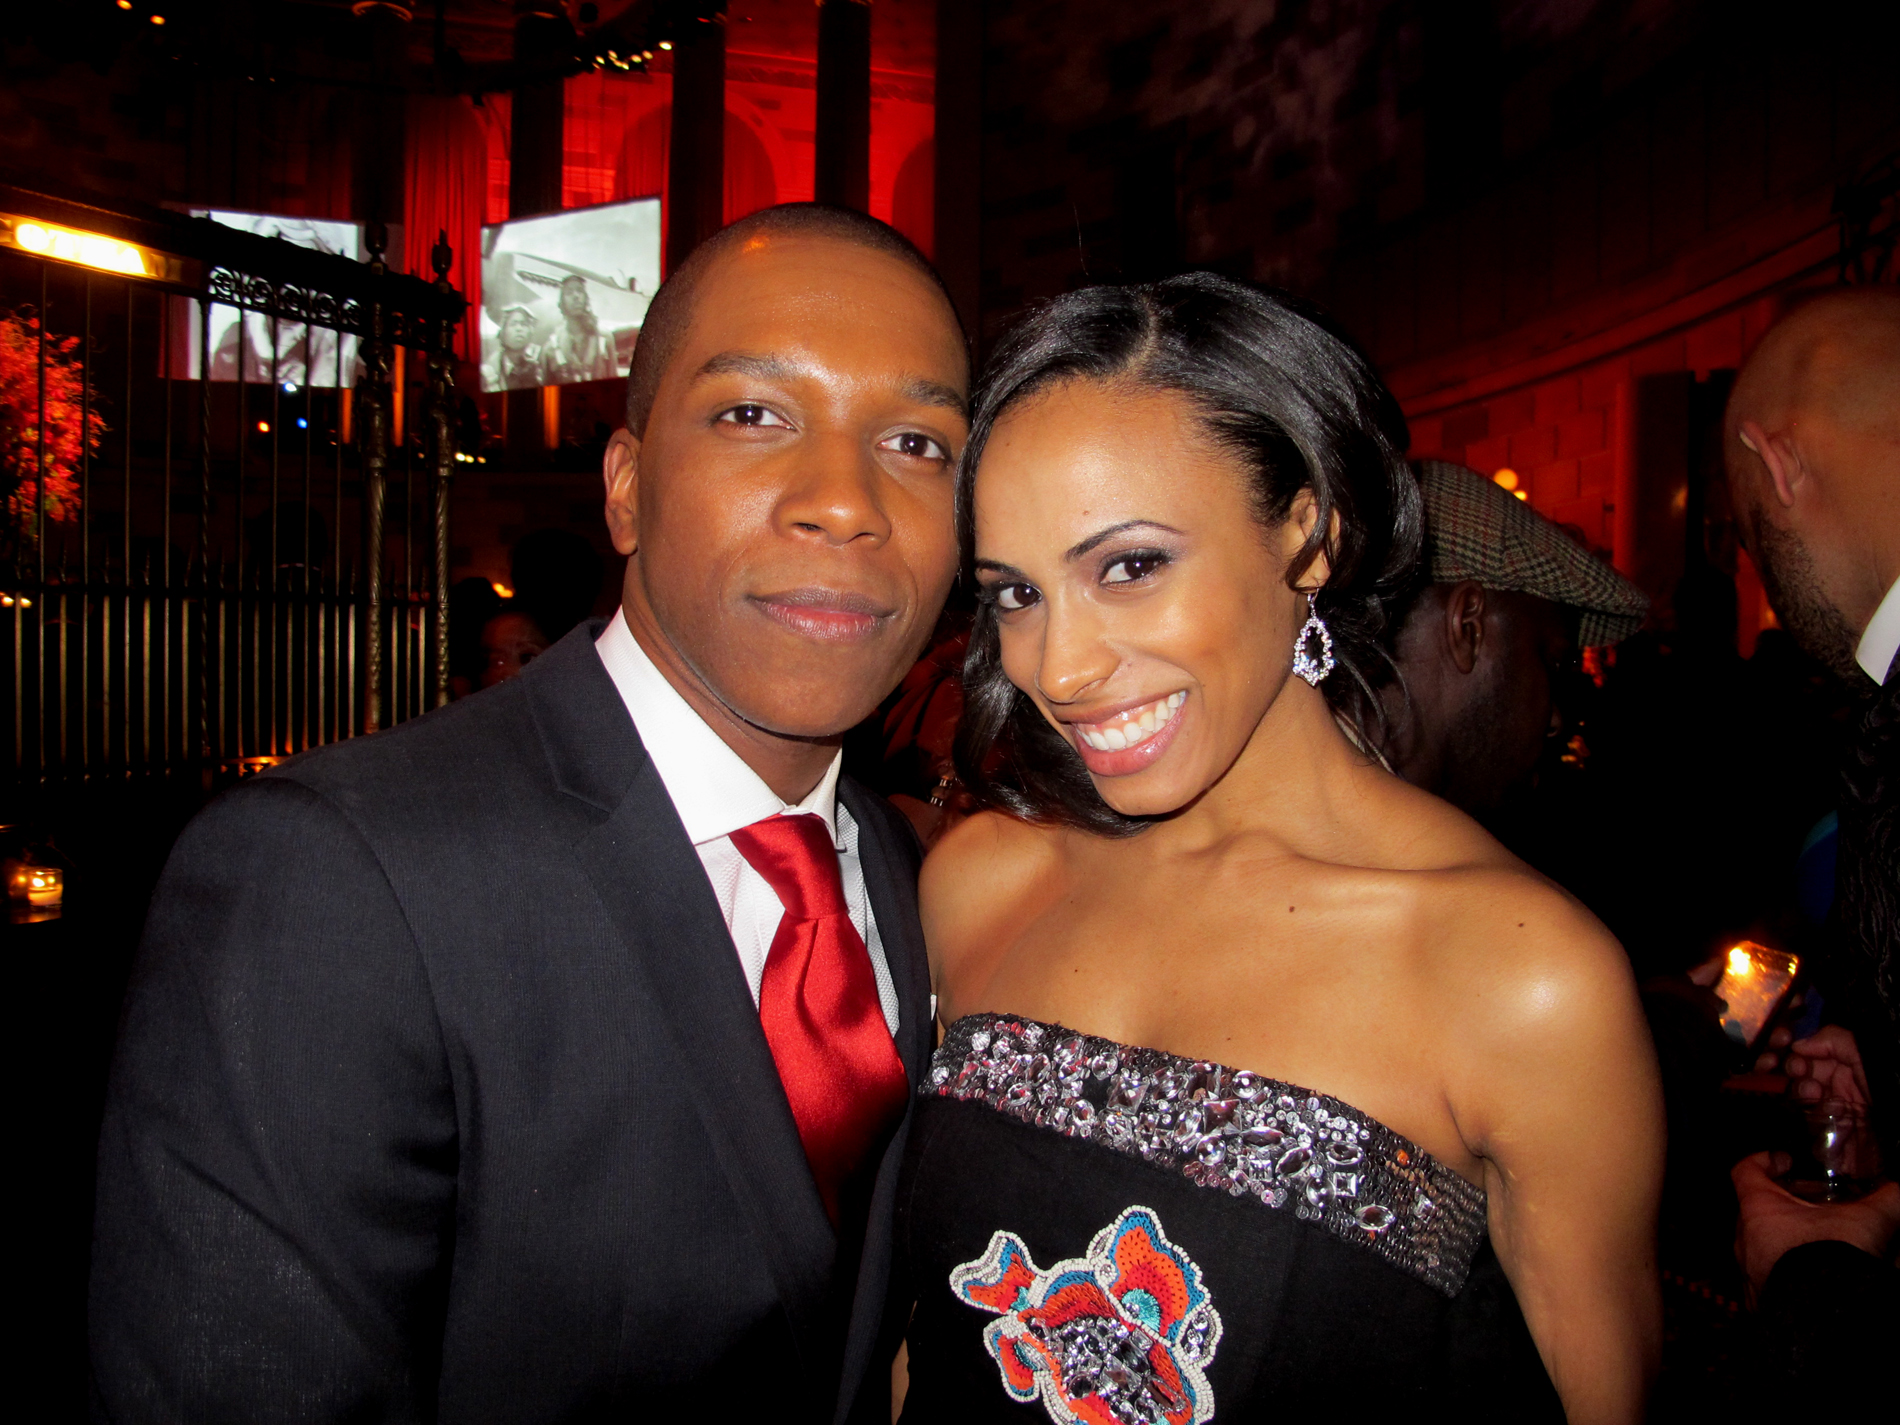 Leslie Odom, Jr. & Nicolette Robinson at the Red Tails premiere after-party in New York.